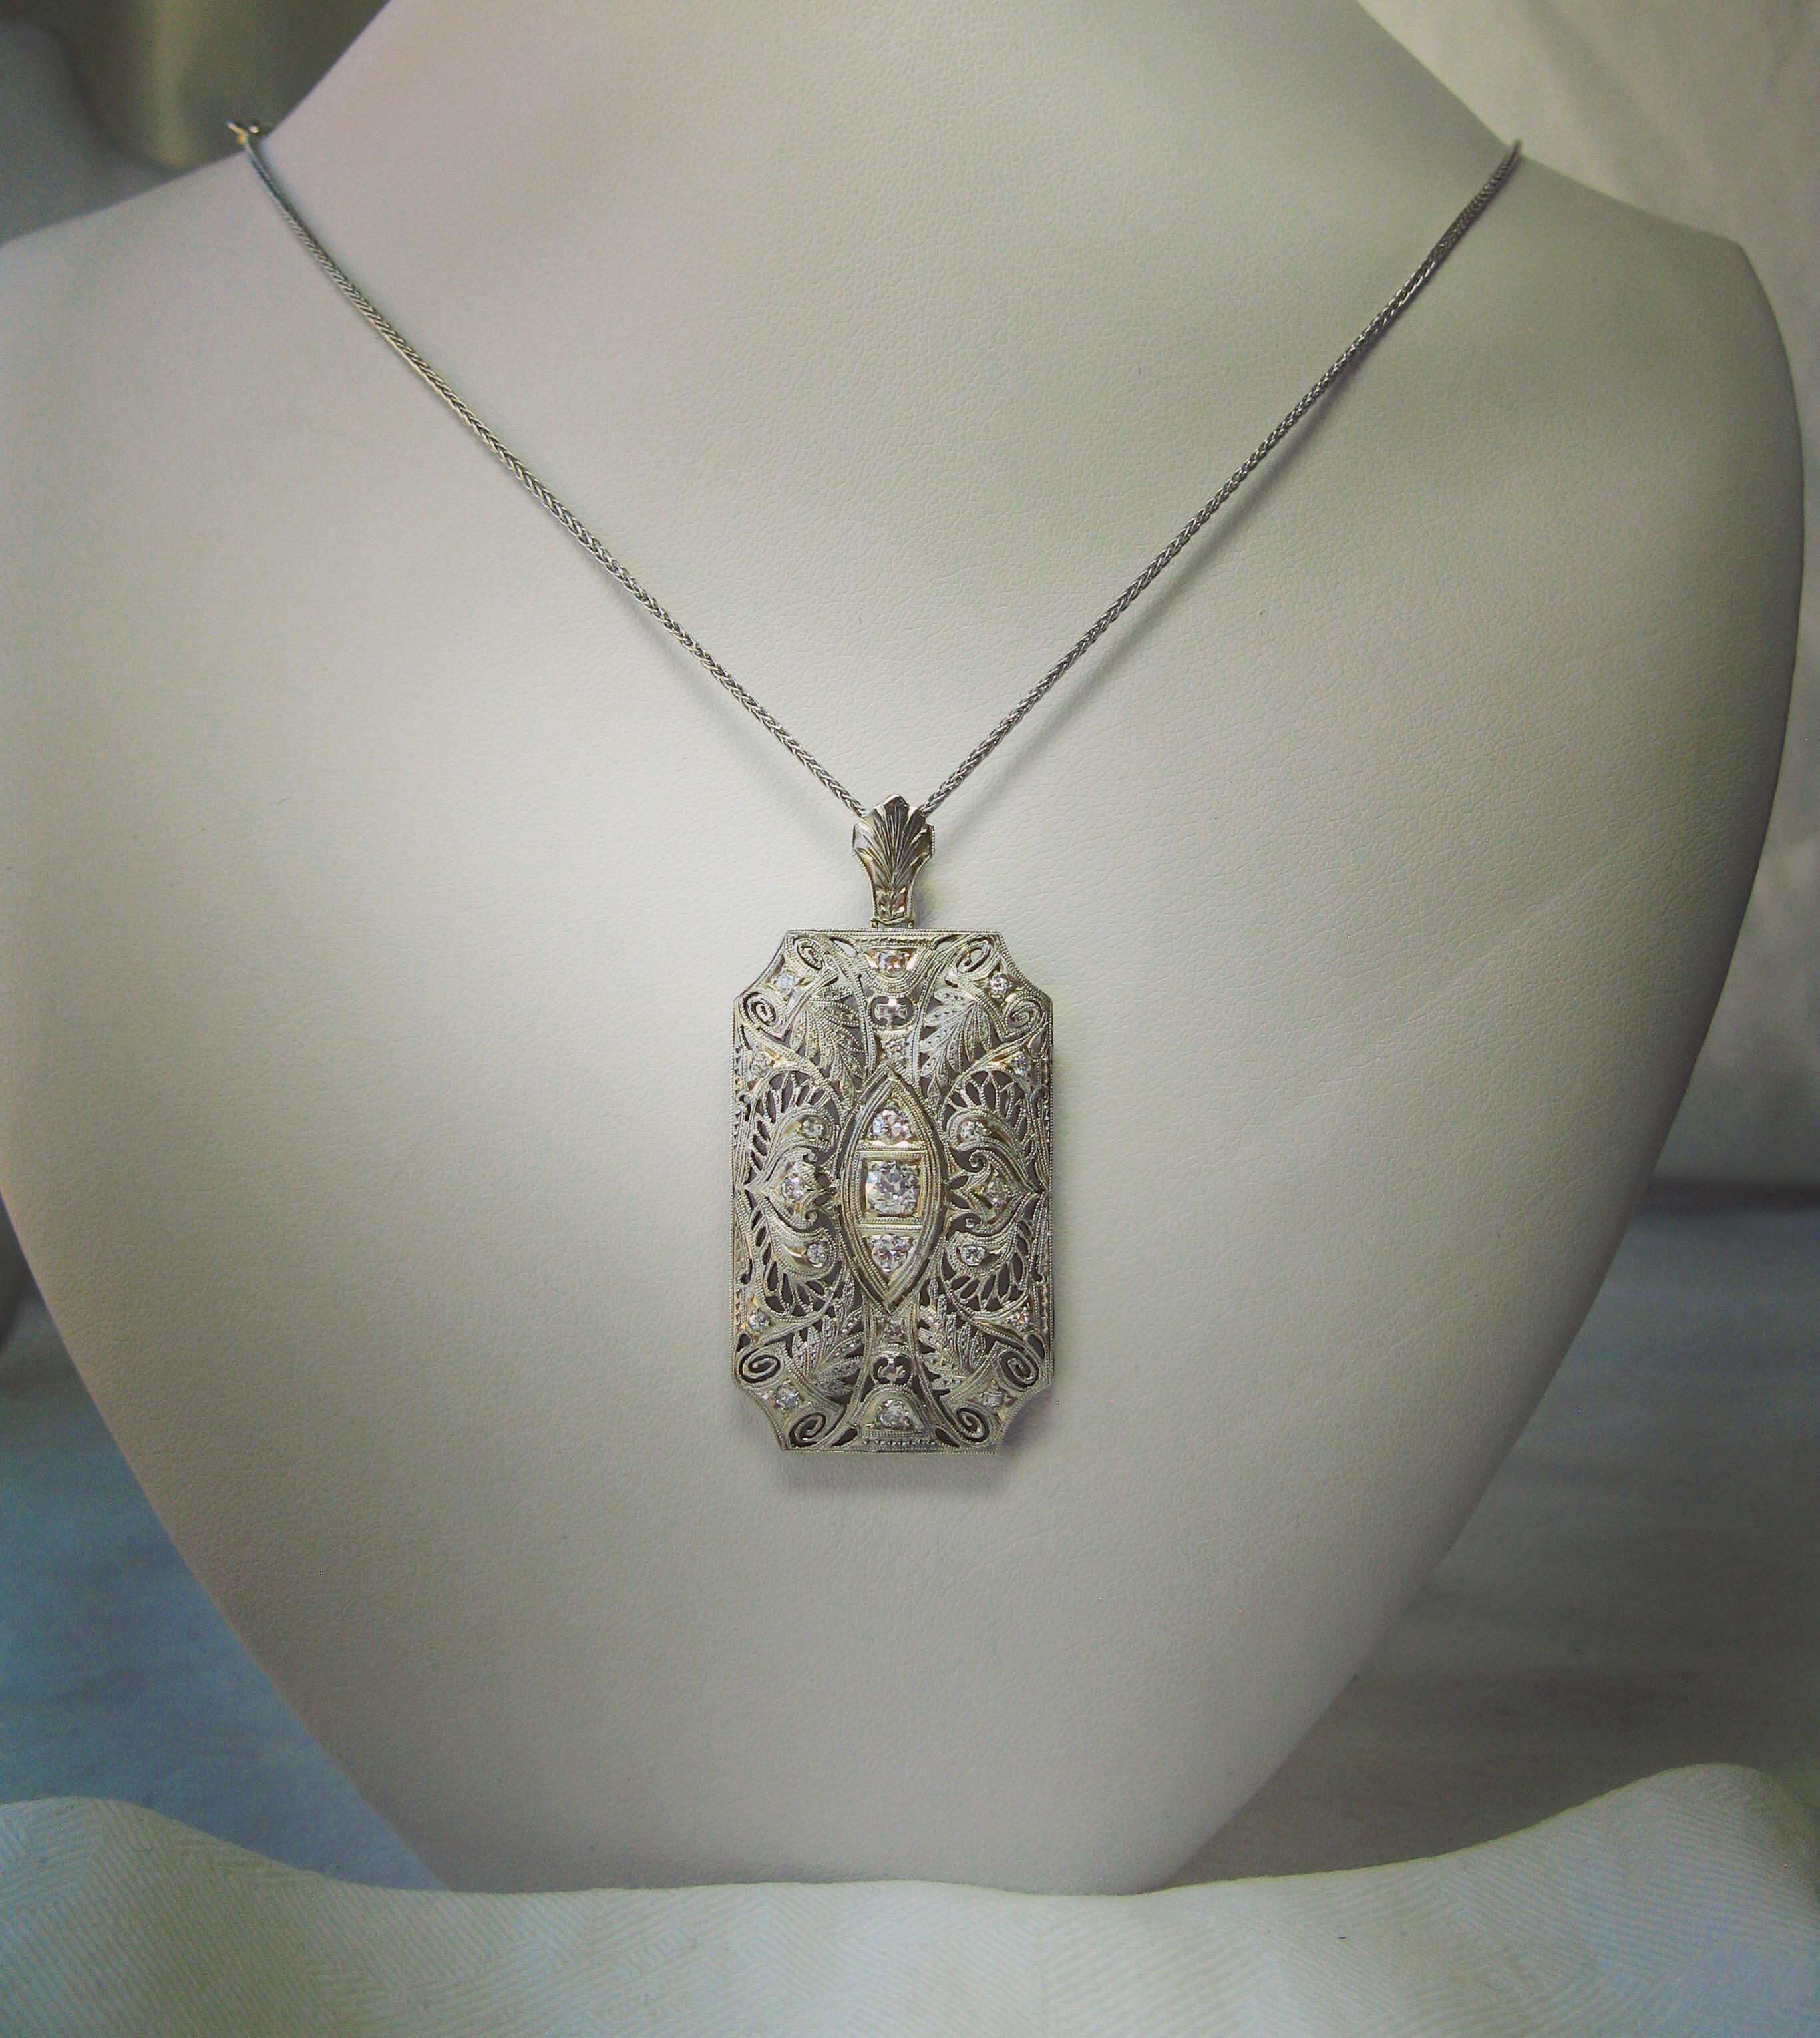 This is a stunning museum quality Victorian - Edwardian Platinum Diamond Lavaliere Pendant with 21 sparkling white Old Mine Cut Diamonds of great beauty in a gorgeous platinum openwork filigree leaf motif pendant necklace.  This original